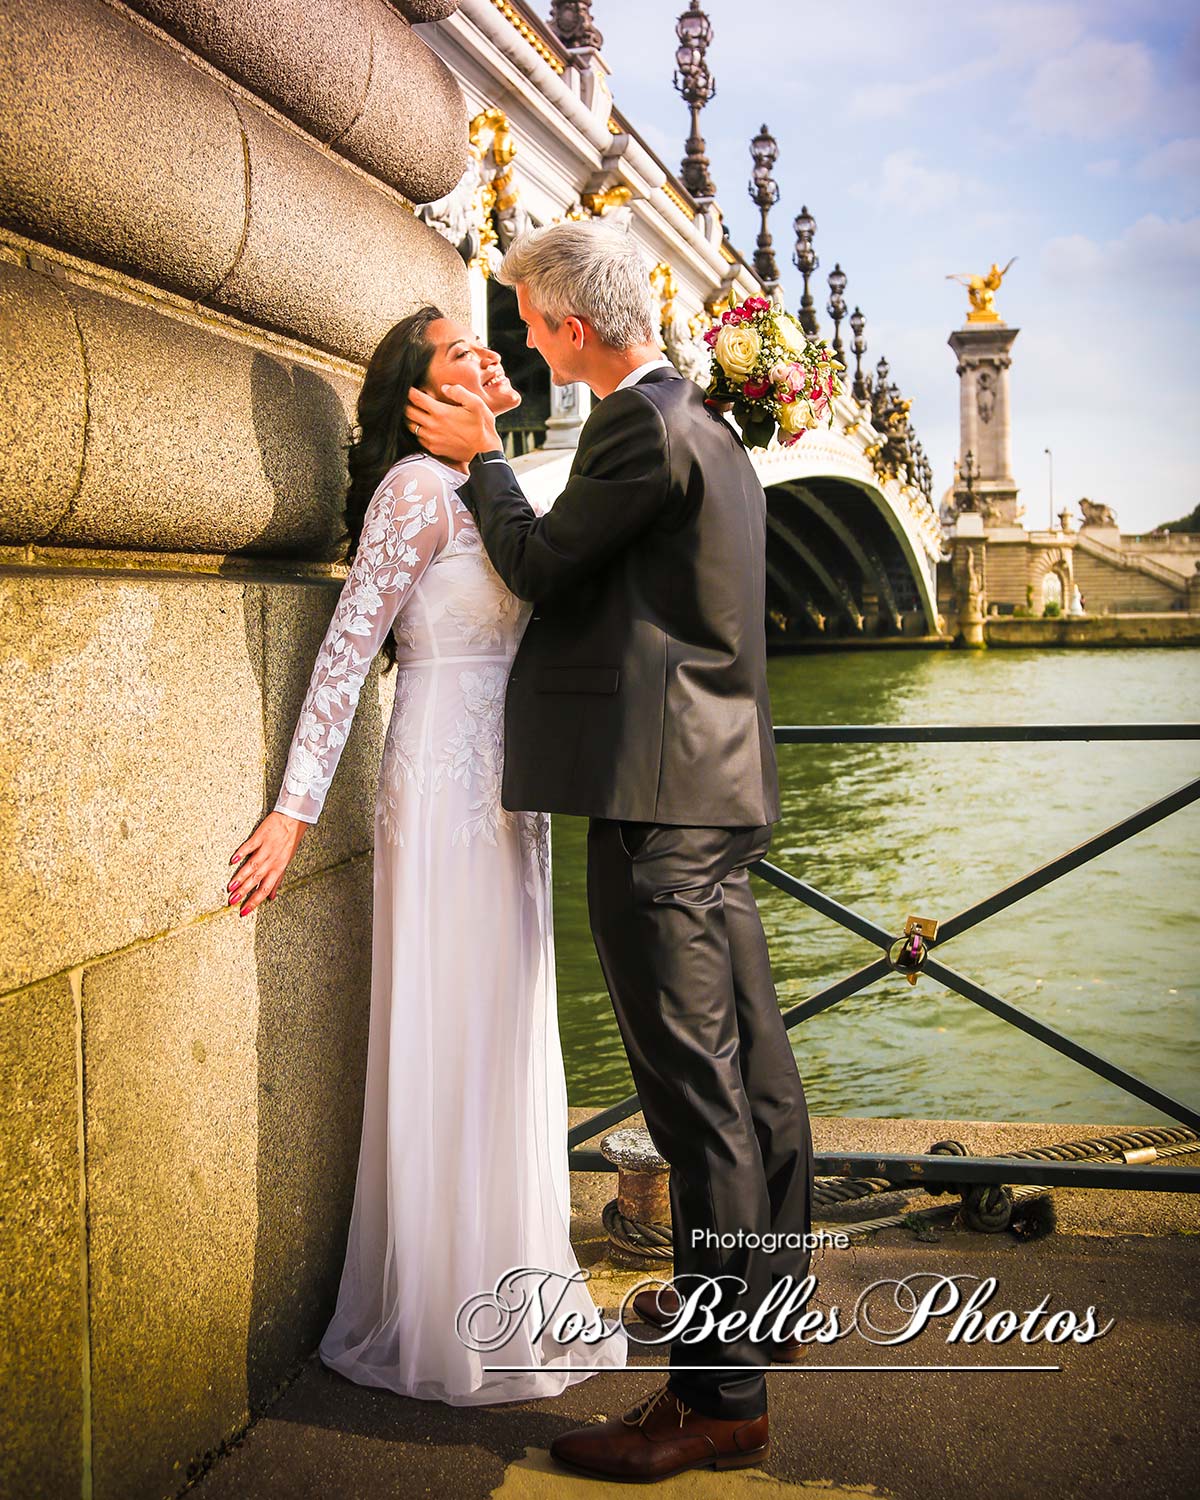 Day-after wedding photo session in Paris